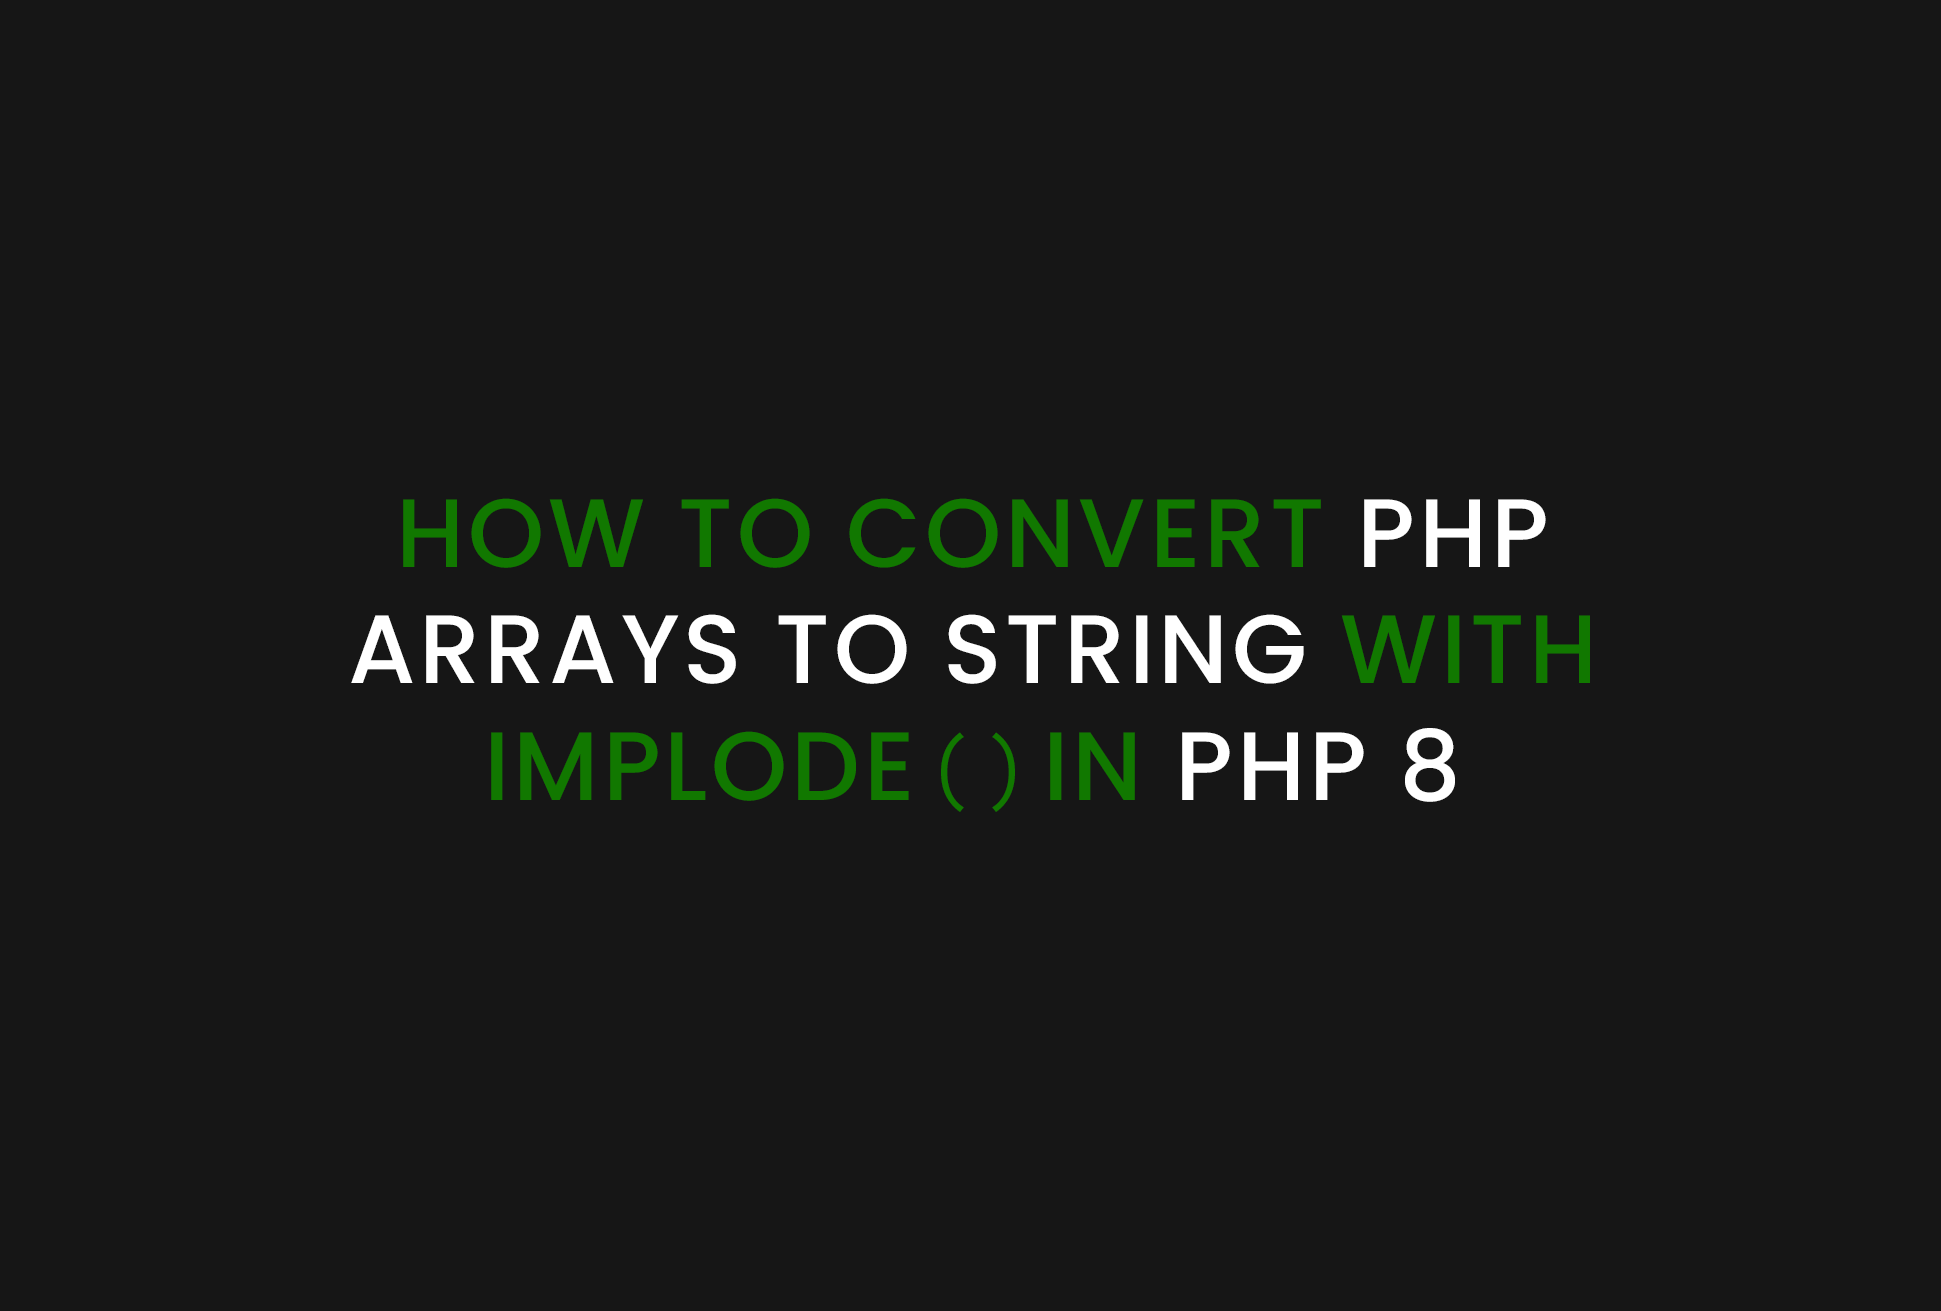 How to Convert PHP Arrays to String with Implode() in PHP 8